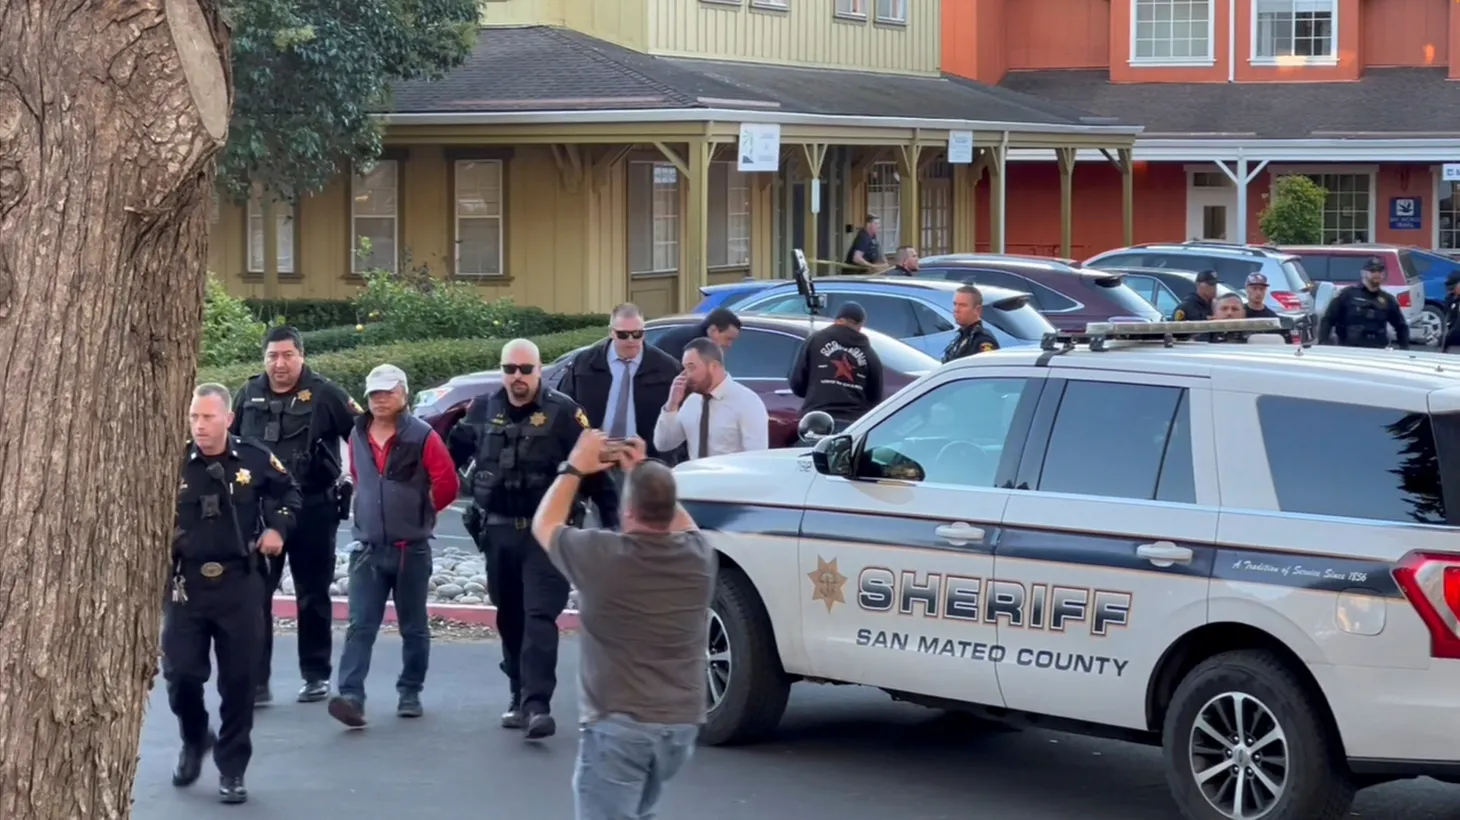 Police officers detain a man, believed to be the Half Moon Bay mass shooting suspect, in Half Moon Bay, California, U.S., January 23, 2023, in this screengrab taken from a social media video. .